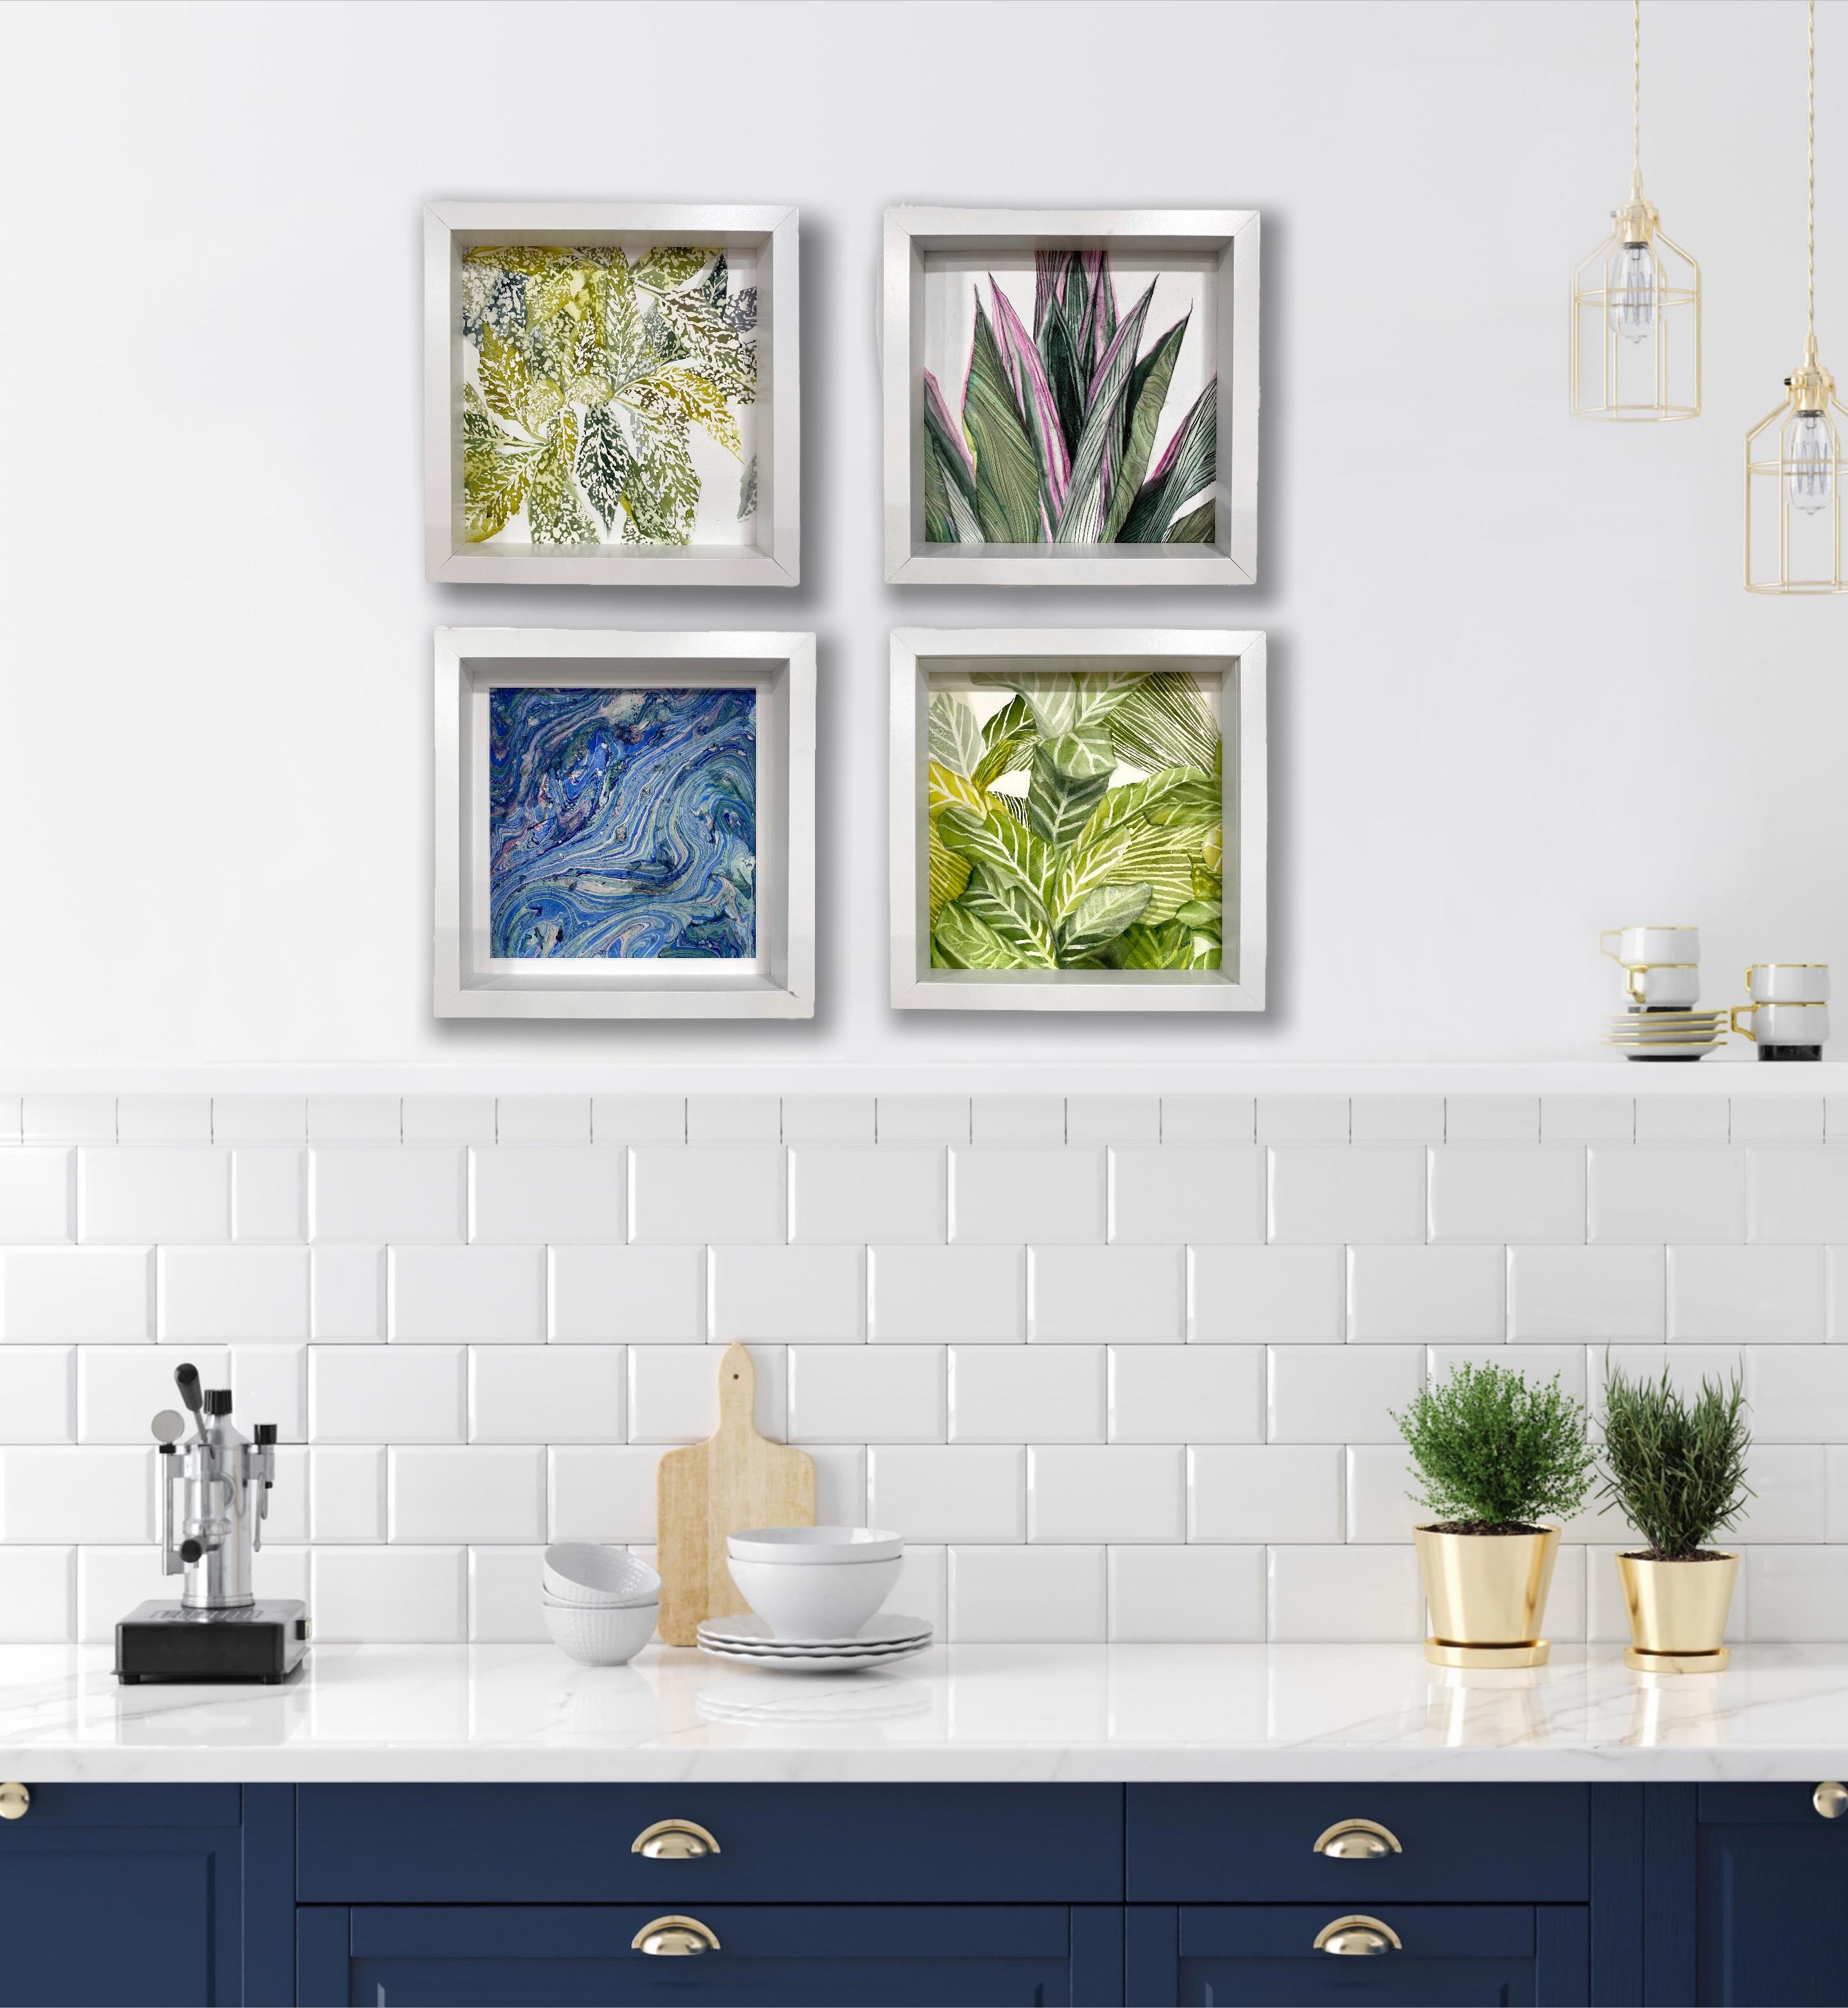 Rachel Kohn's beautiful rendered abstract yet representational still life watercolors of plant life liven up any space, from the urban jungalow to modern green interiors. Often purchased as sets, mix and match to create a beautiful salan style wall.